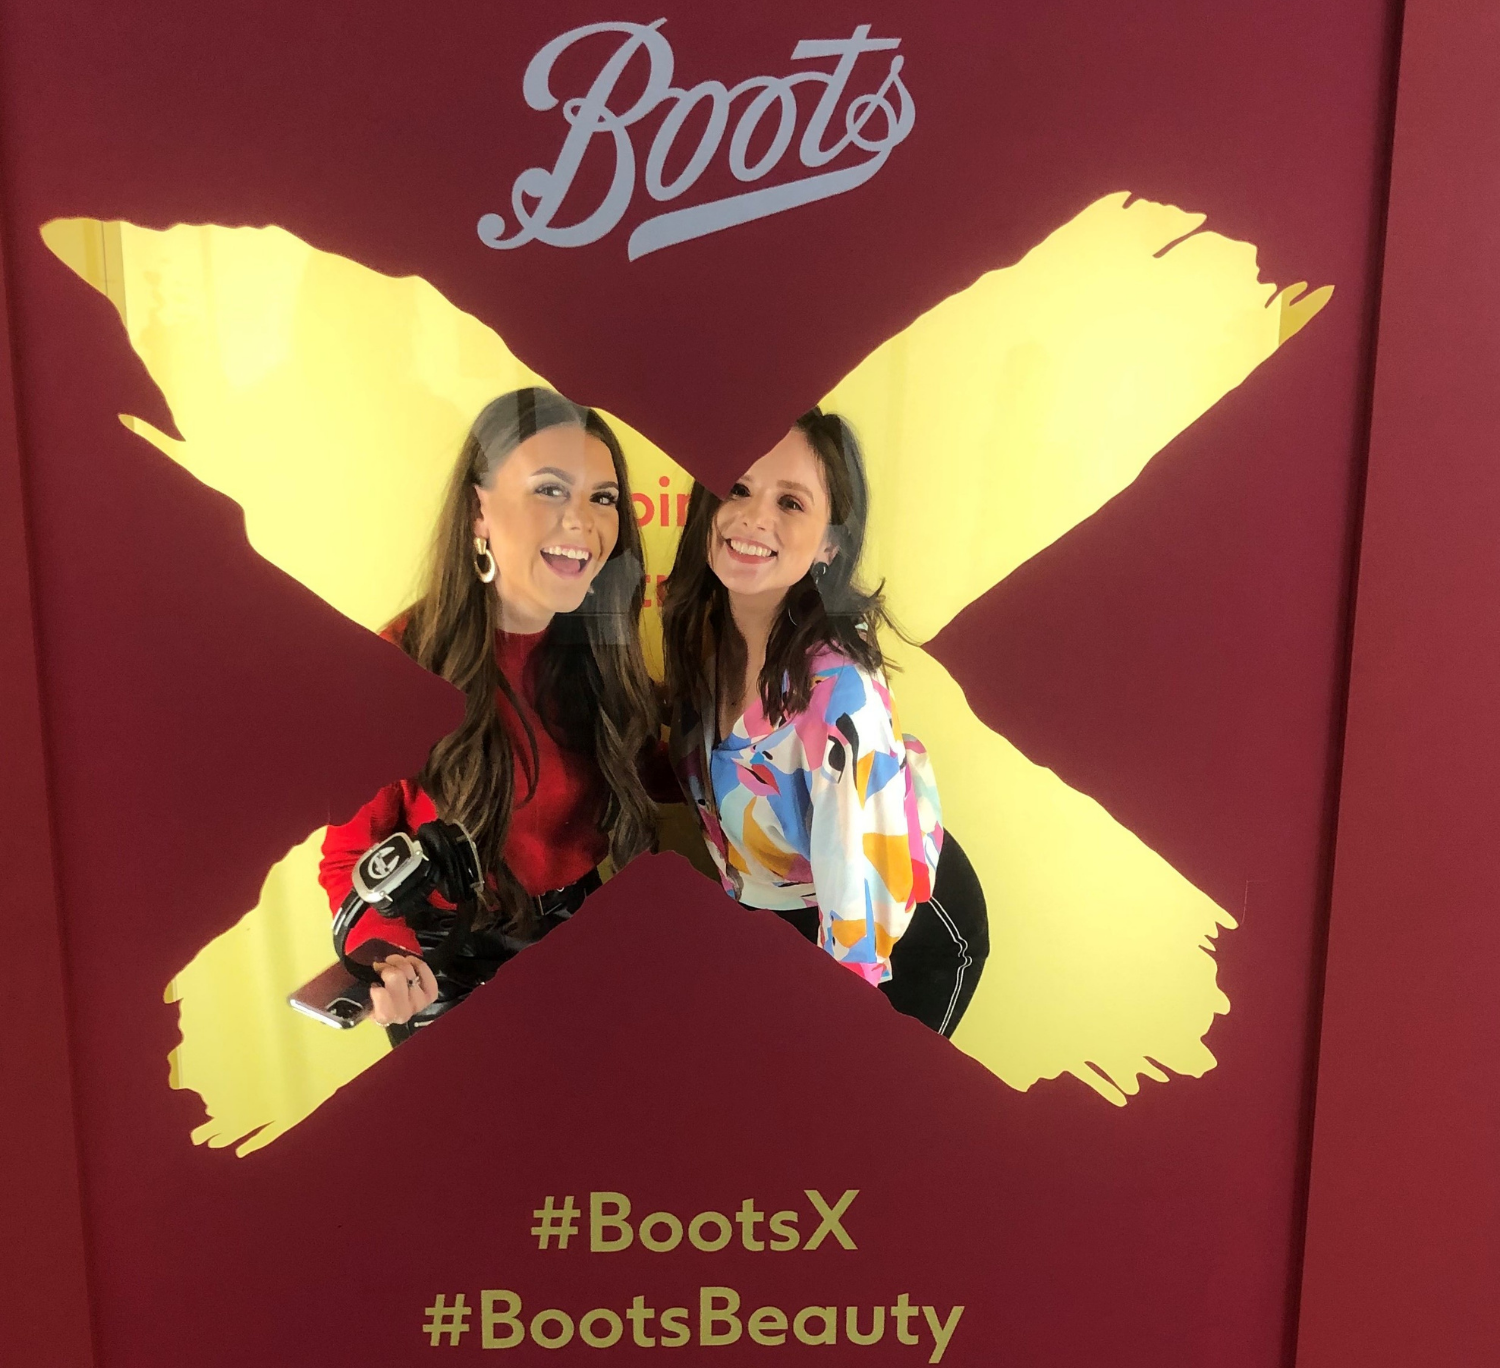 Holly and team member at #BootsX #BootsBeauty event